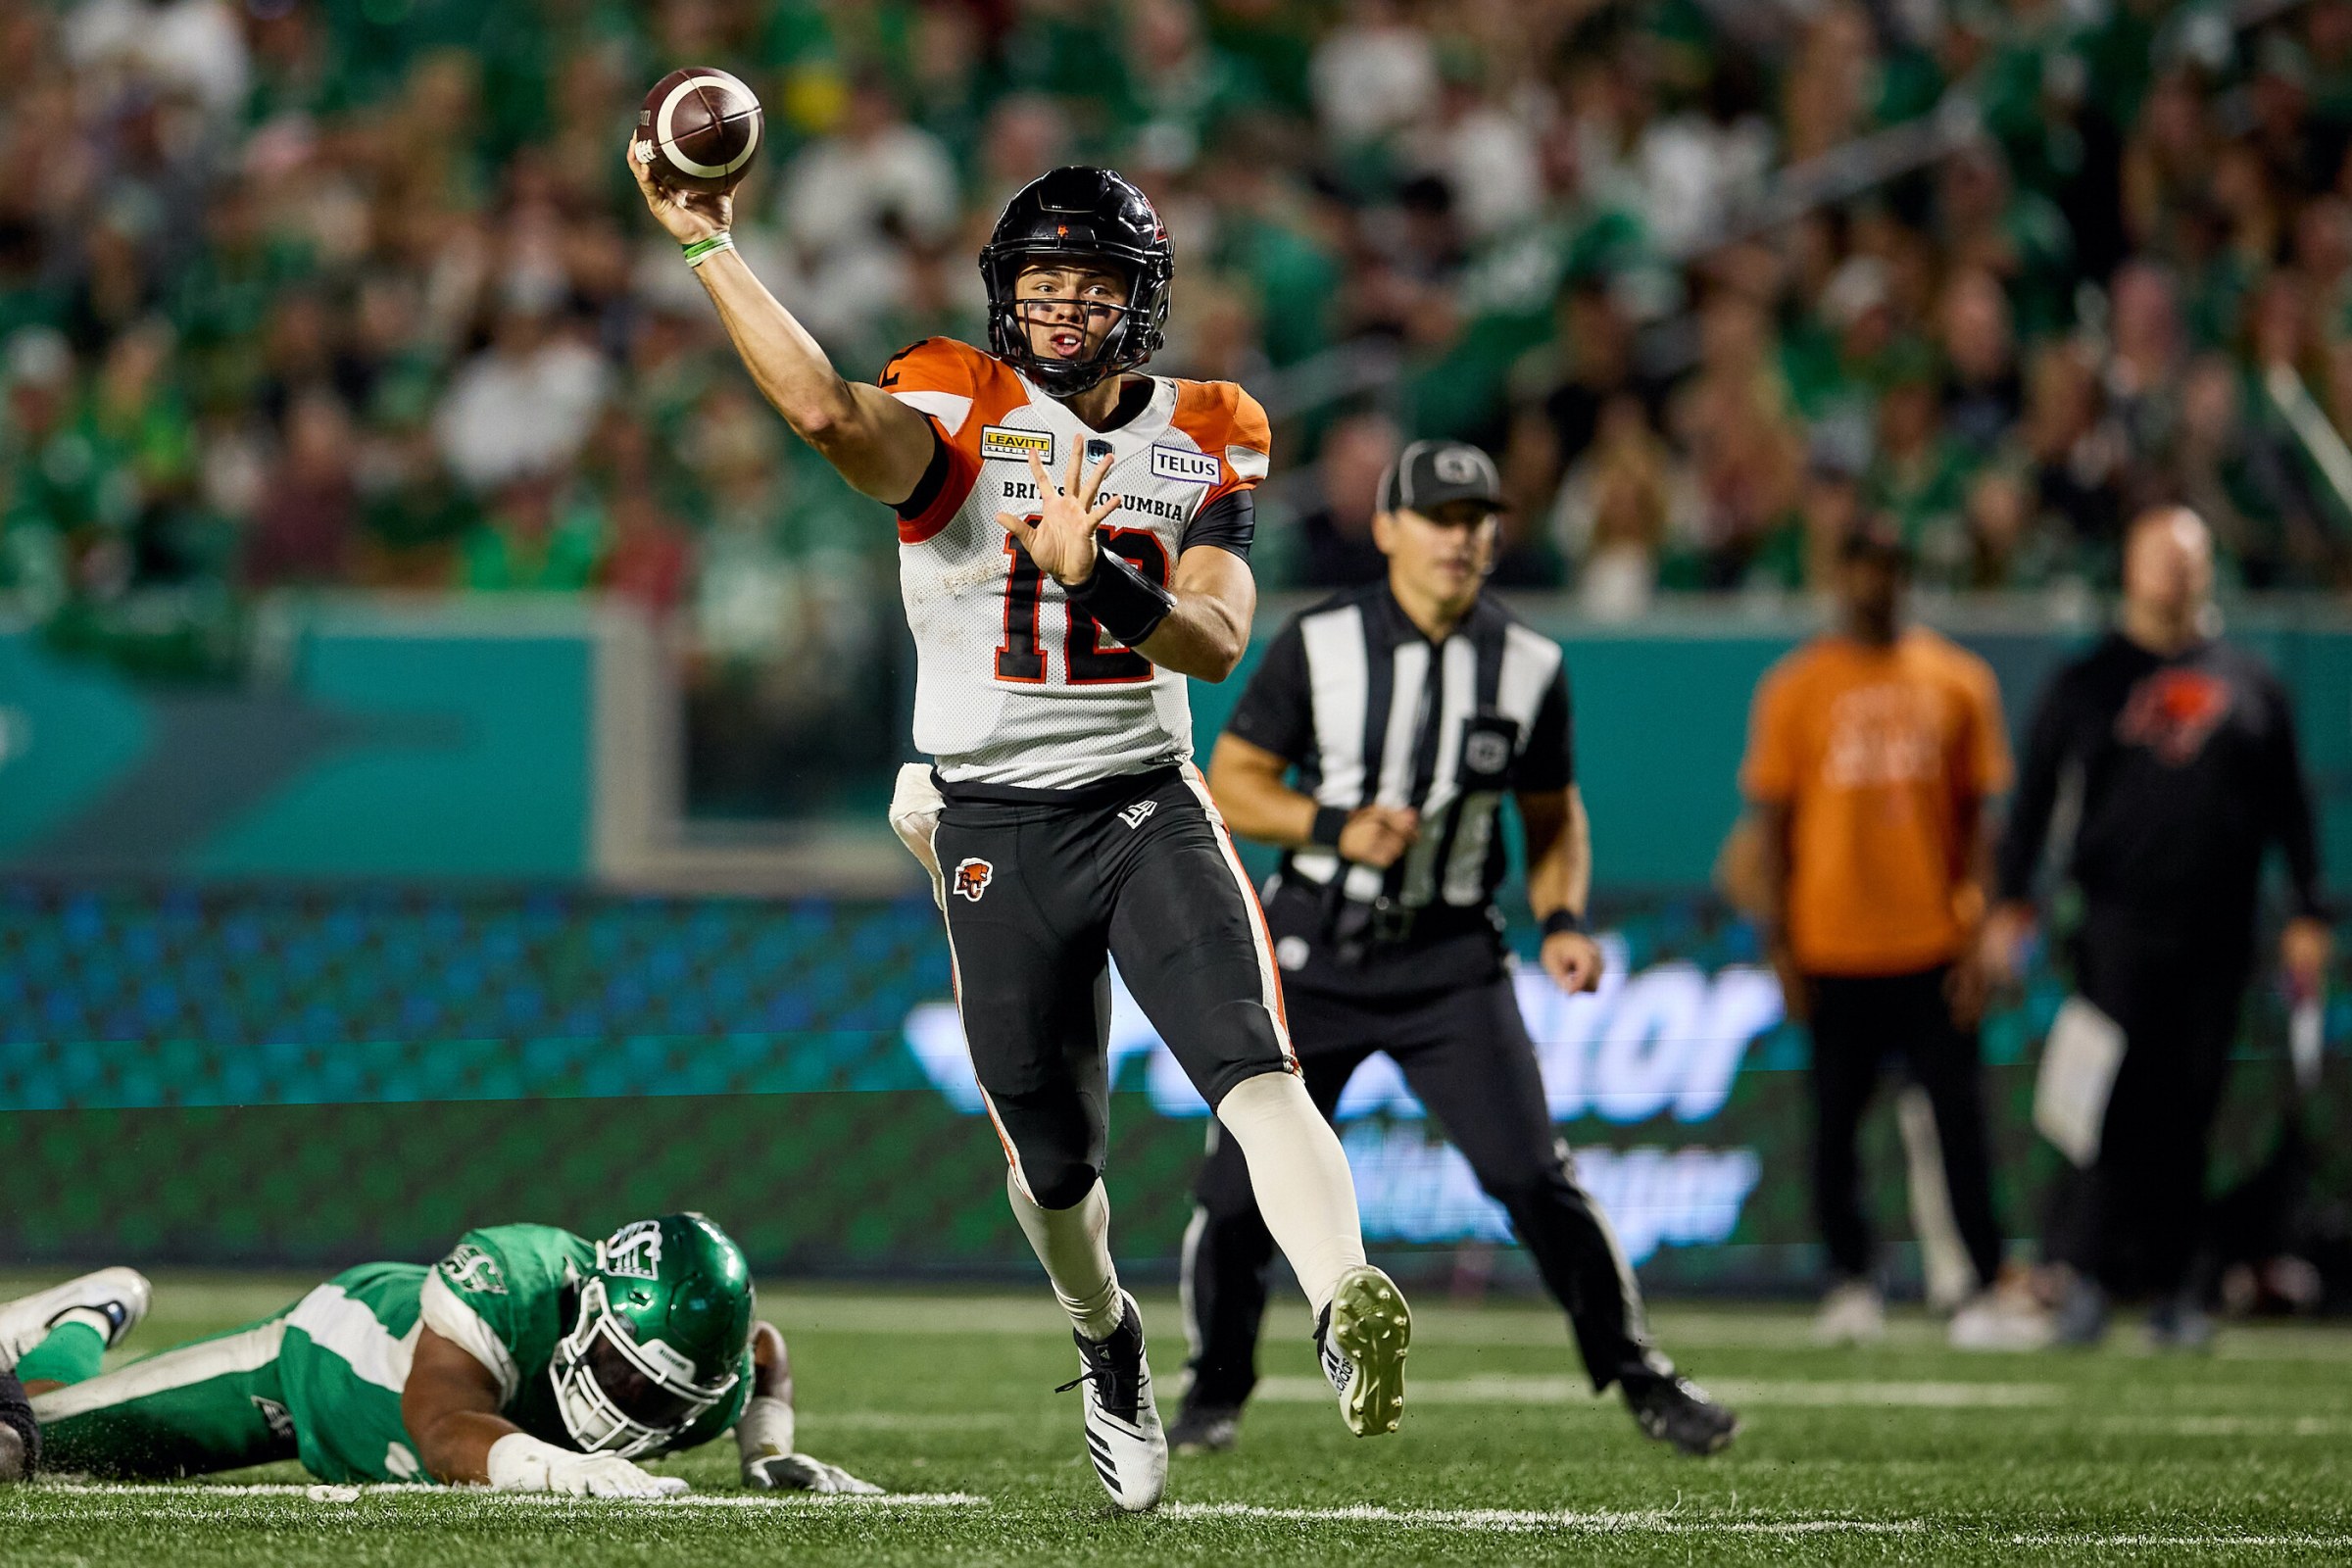 REGINA, SK - AUGUST 19: Nathan Rourke #12 of the BC Lions throws on the run in the first half of the game between the BC Lions and Saskatchewan Roughriders at Mosaic Stadium on August 19, 2022 in Regina, Canada. (Photo by Brent Just/Getty Images)